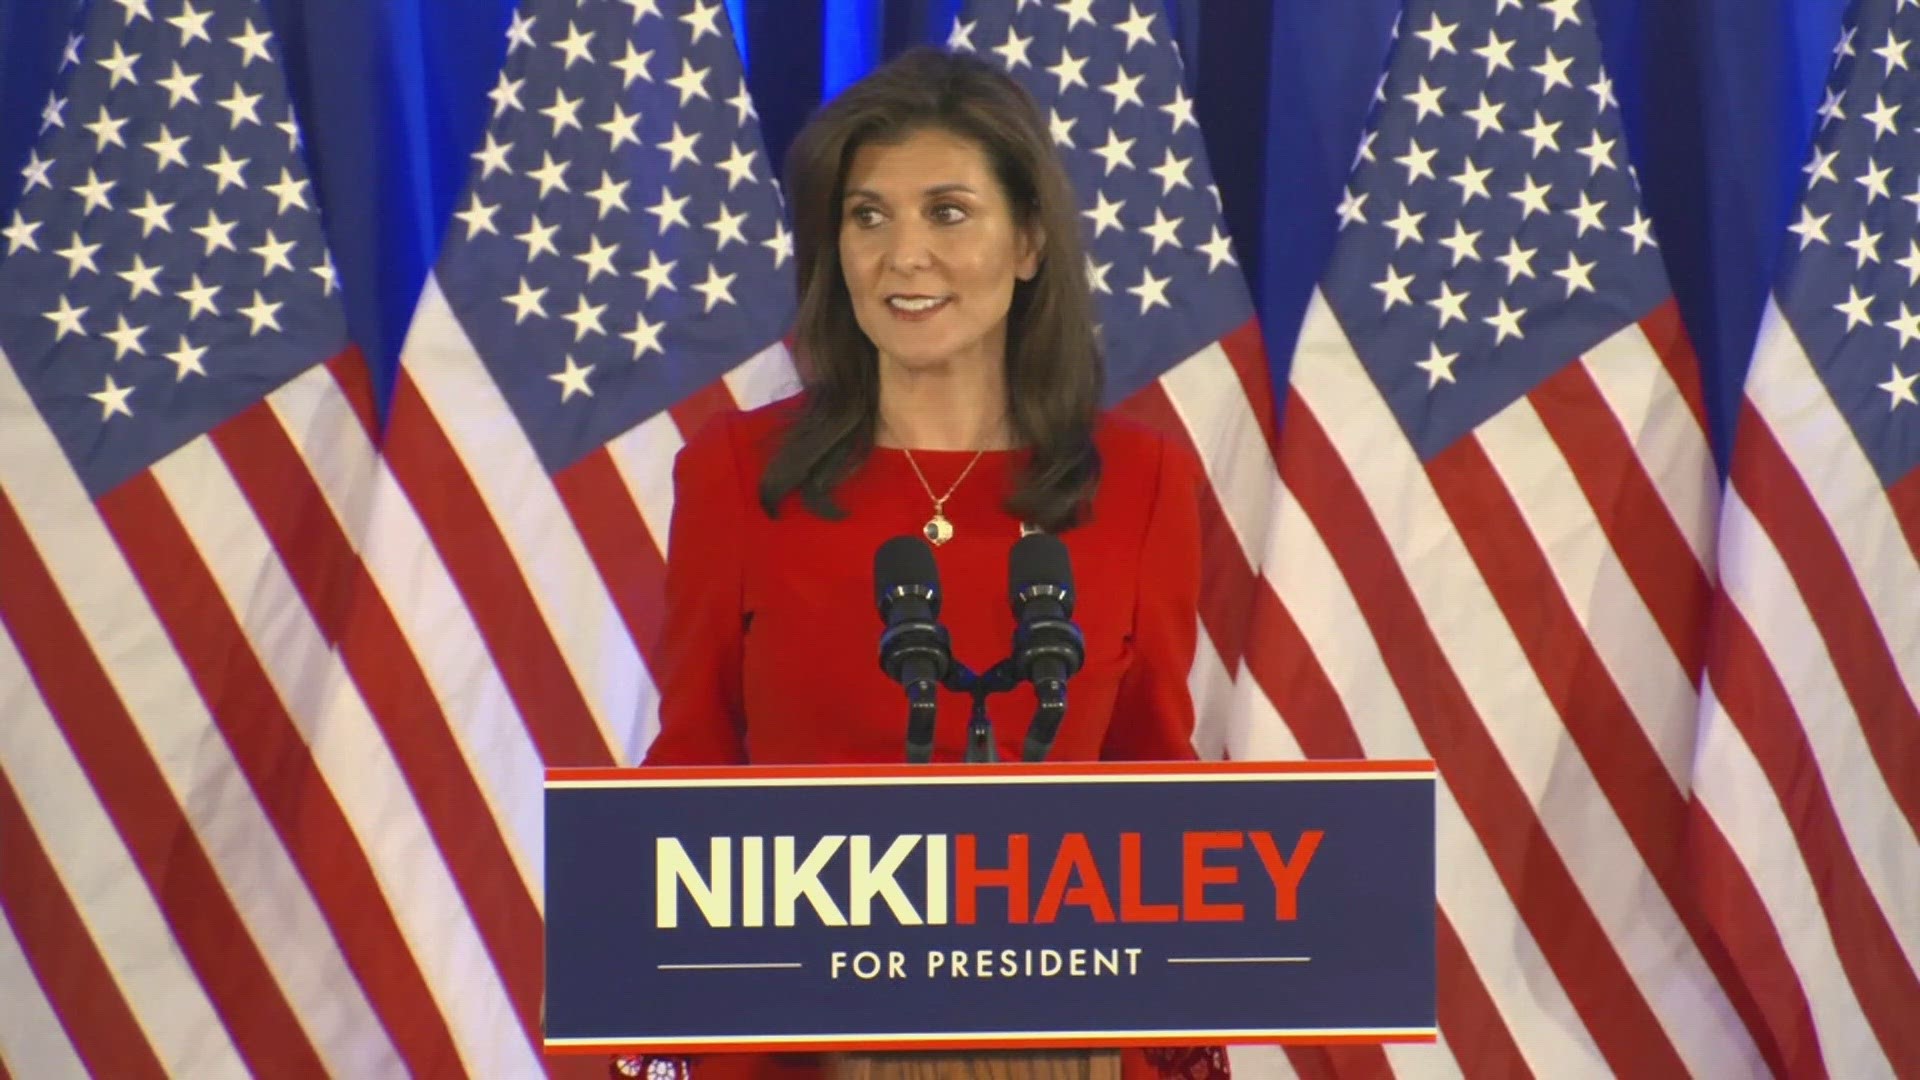 Haley made history by being the first woman to win a Republican primary.